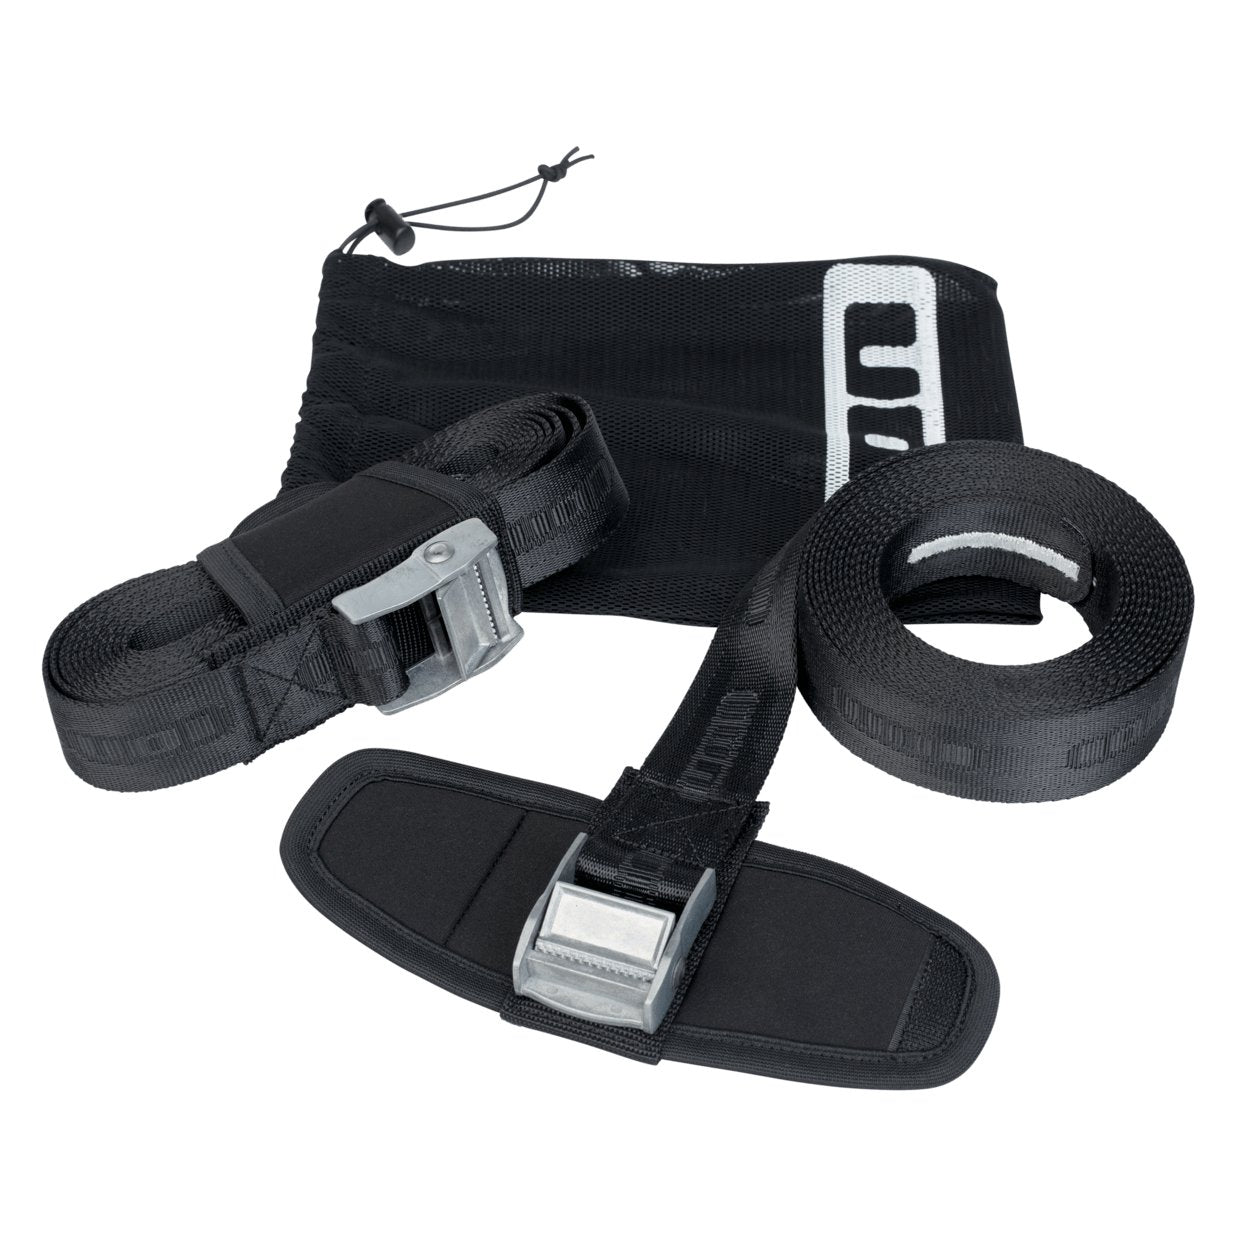 ION Roof Straps 38 2022 - Worthing Watersports - 9008415558605 - Accessories - ION Water